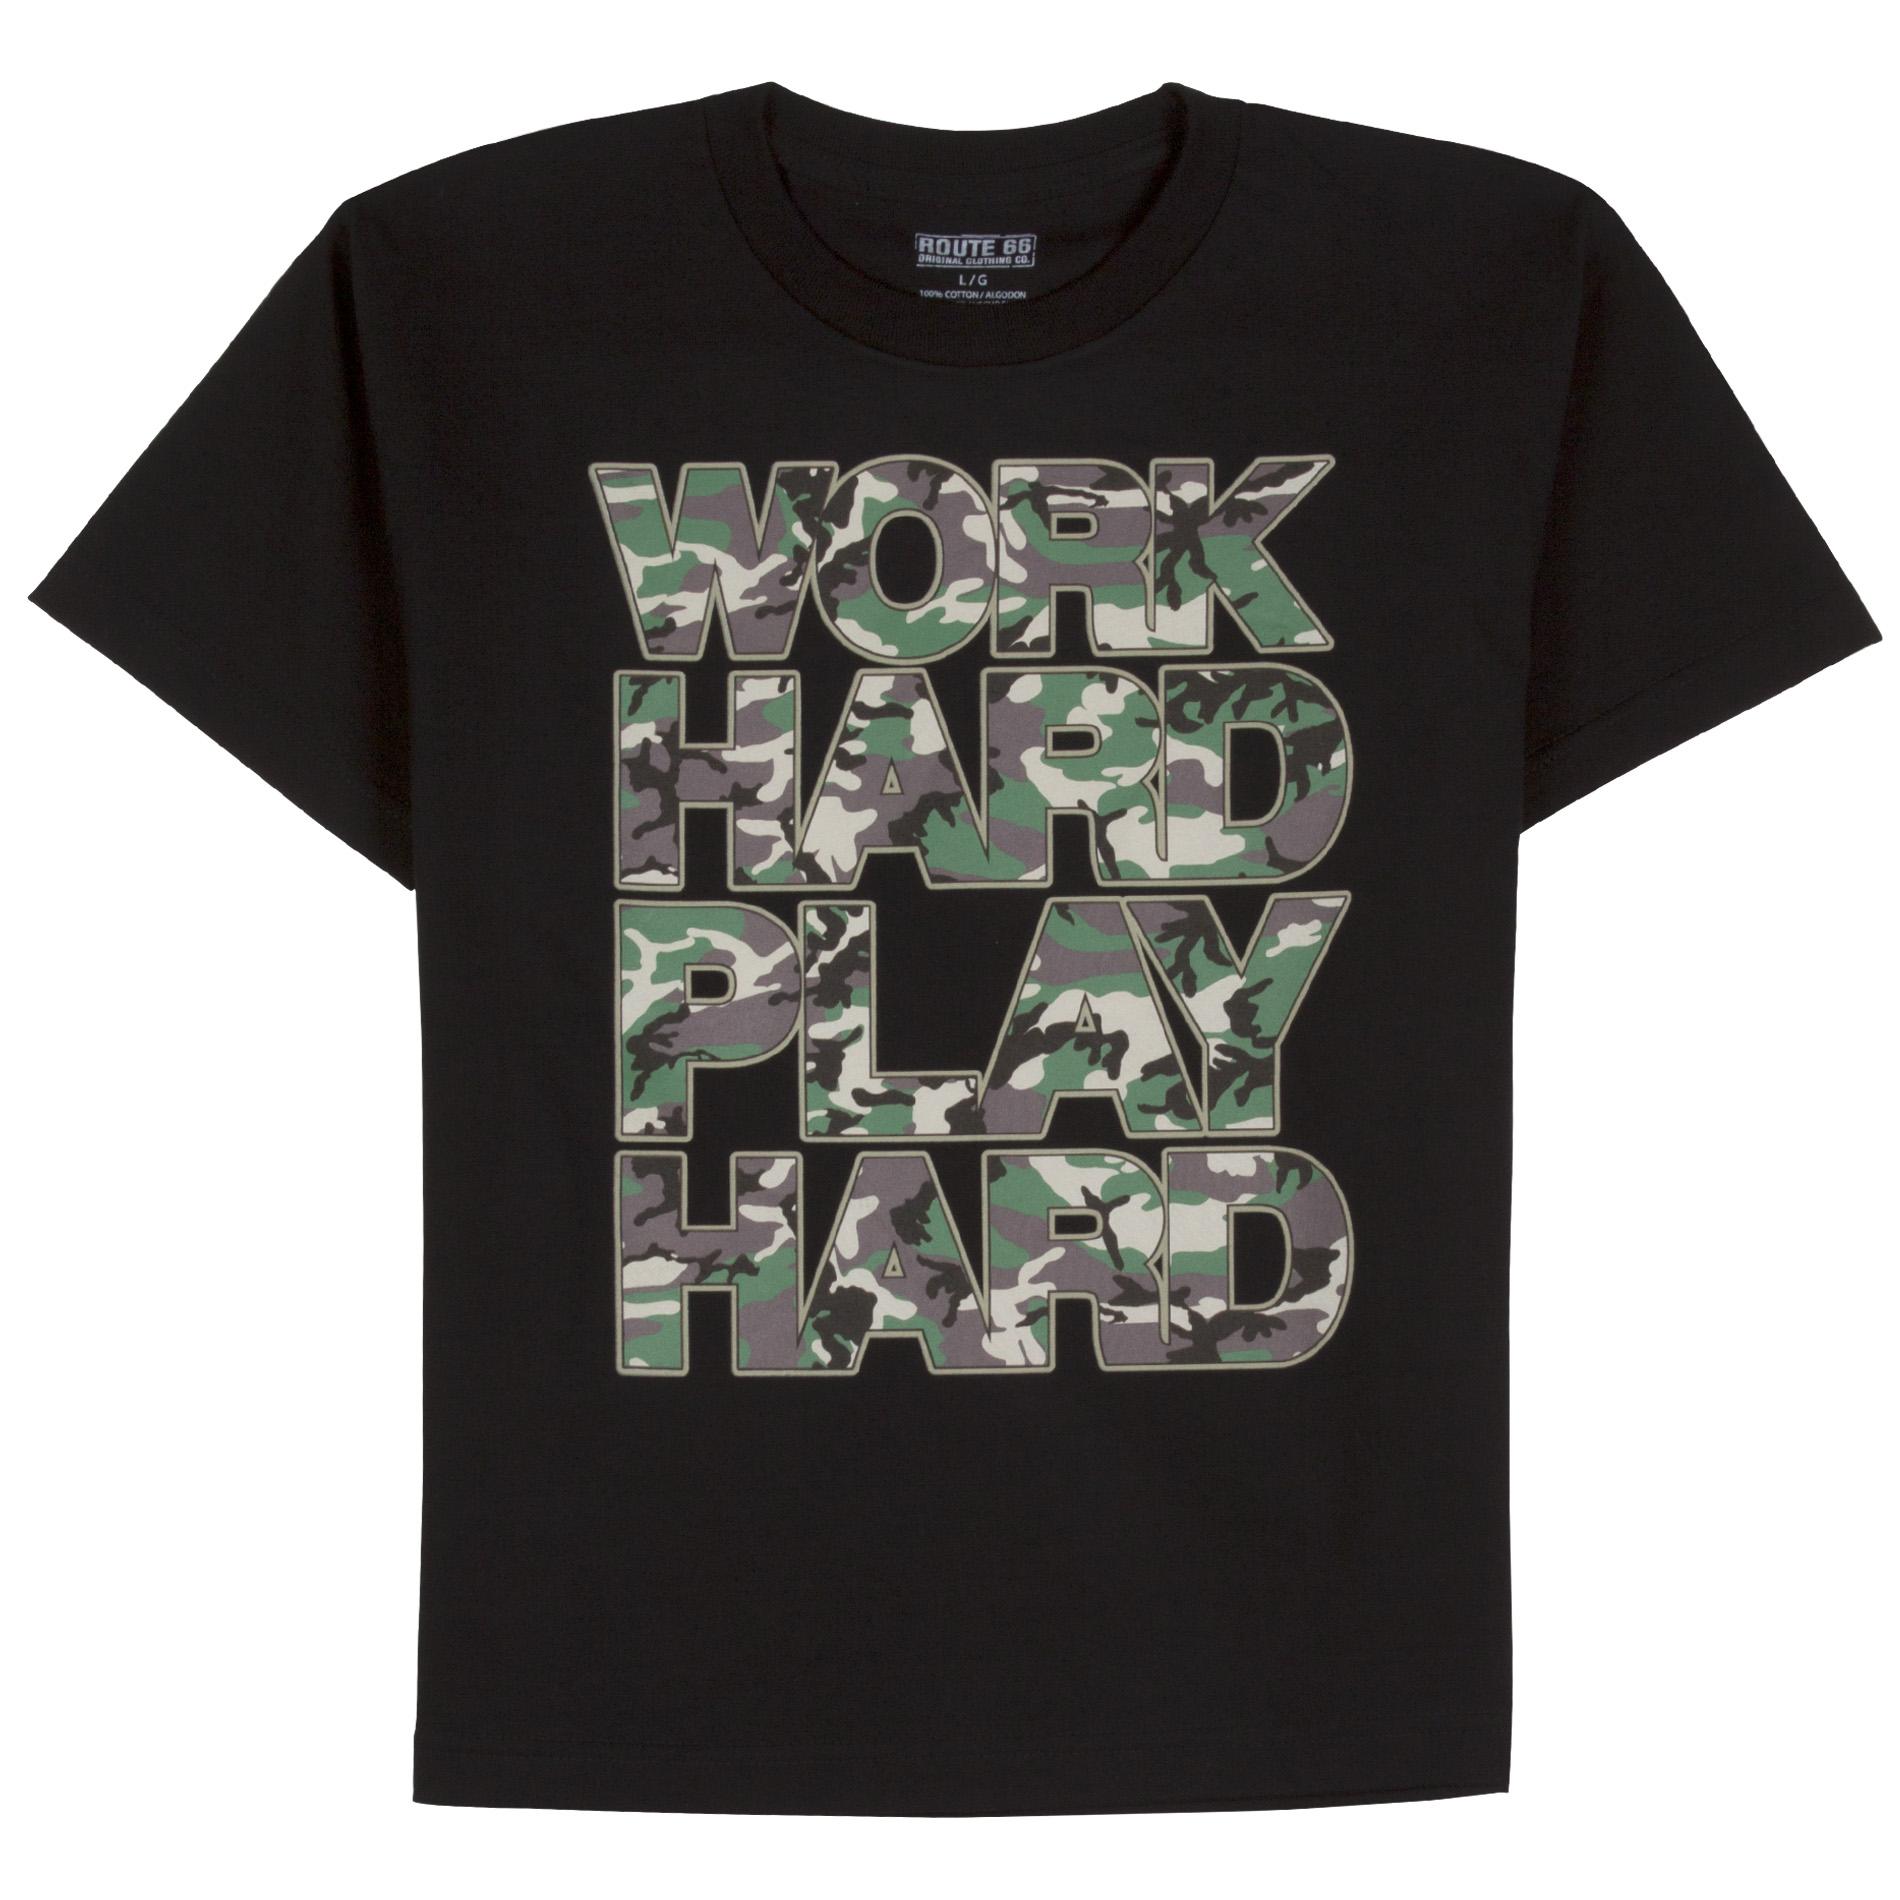 Route 66 Boy's Graphic T-Shirt - Work Hard Play Hard